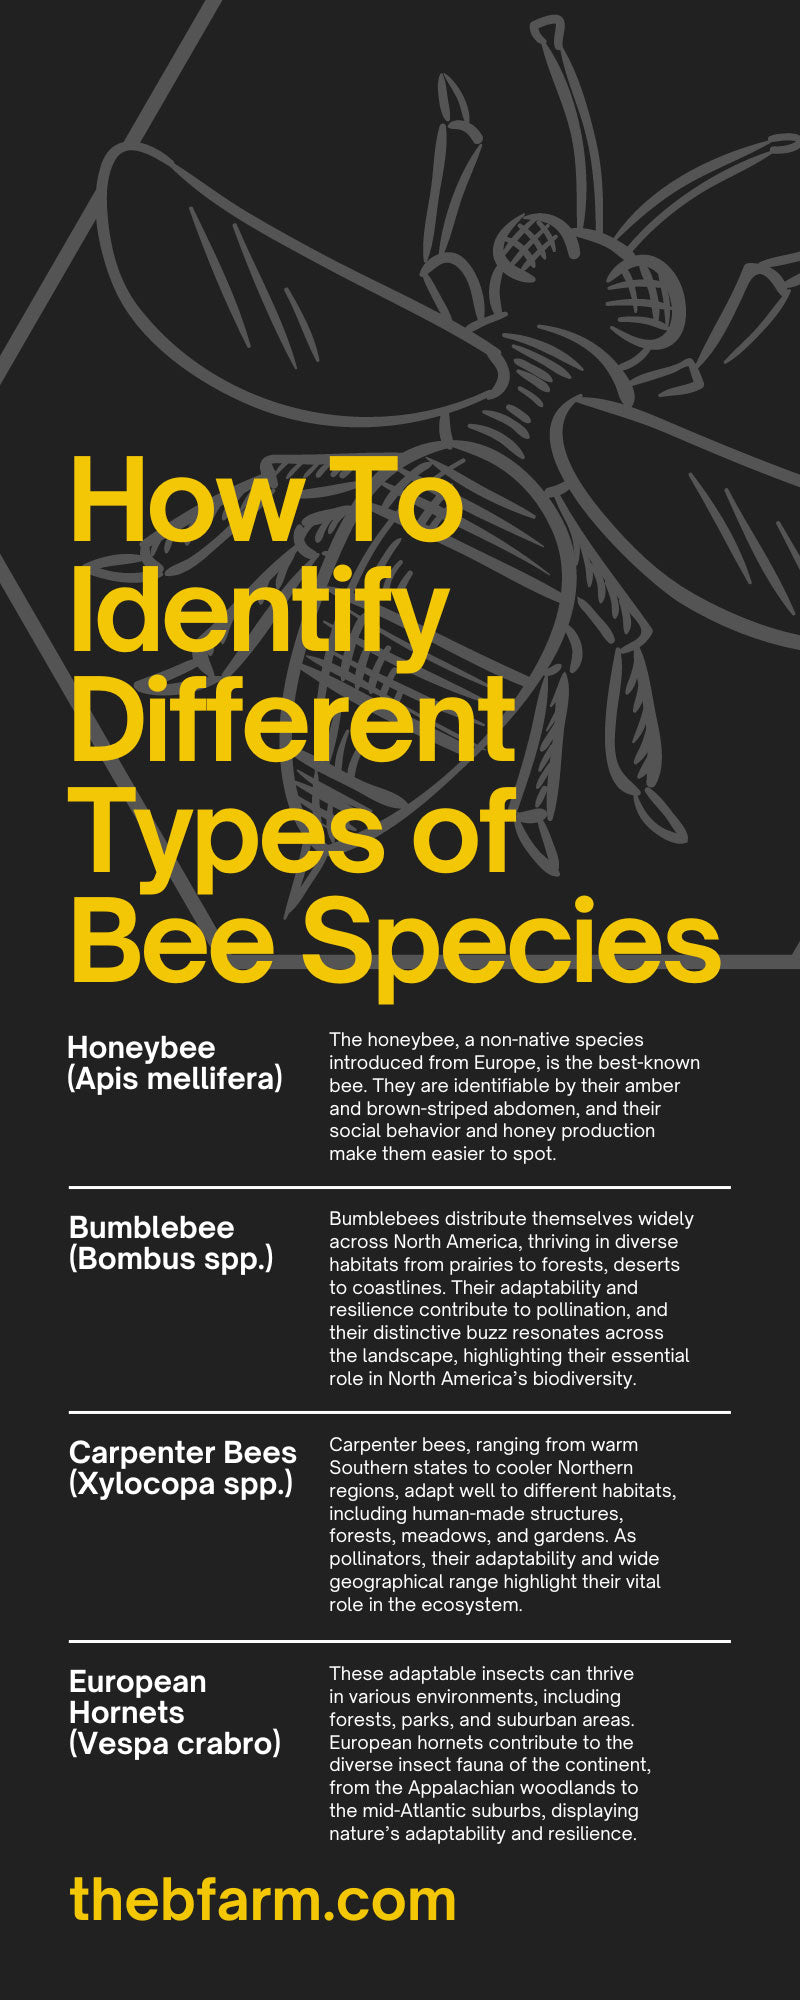 How To Identify Different Types of Bee Species